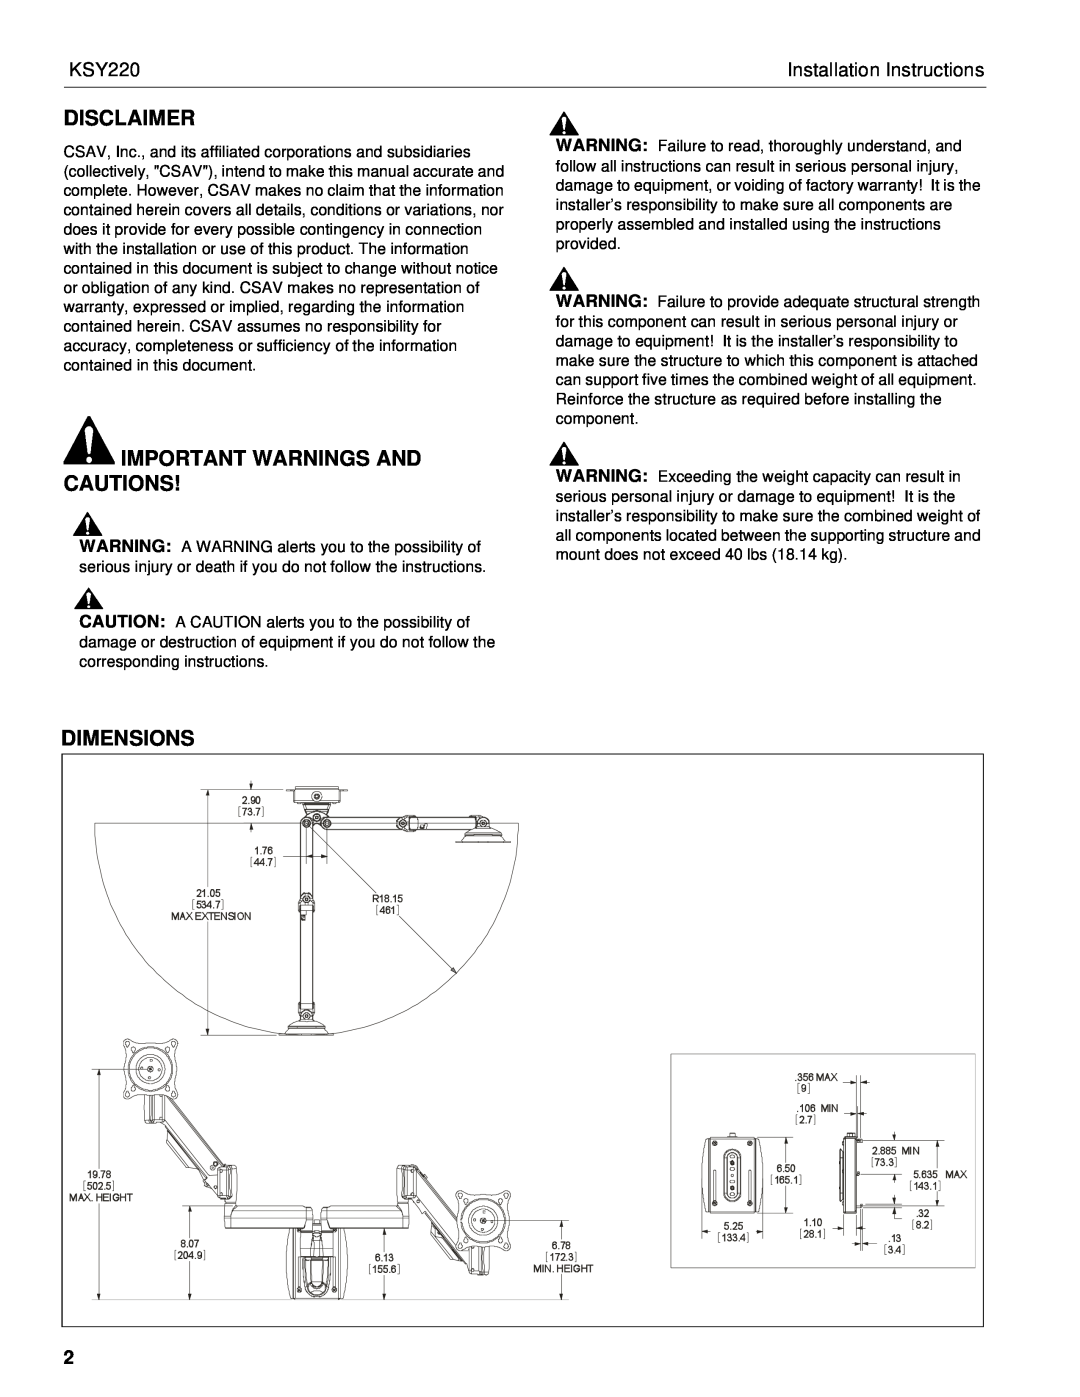 Chief Manufacturing KSY220 Disclaimer, Important Warnings And Cautions, Installation Instructions, Dimensions 